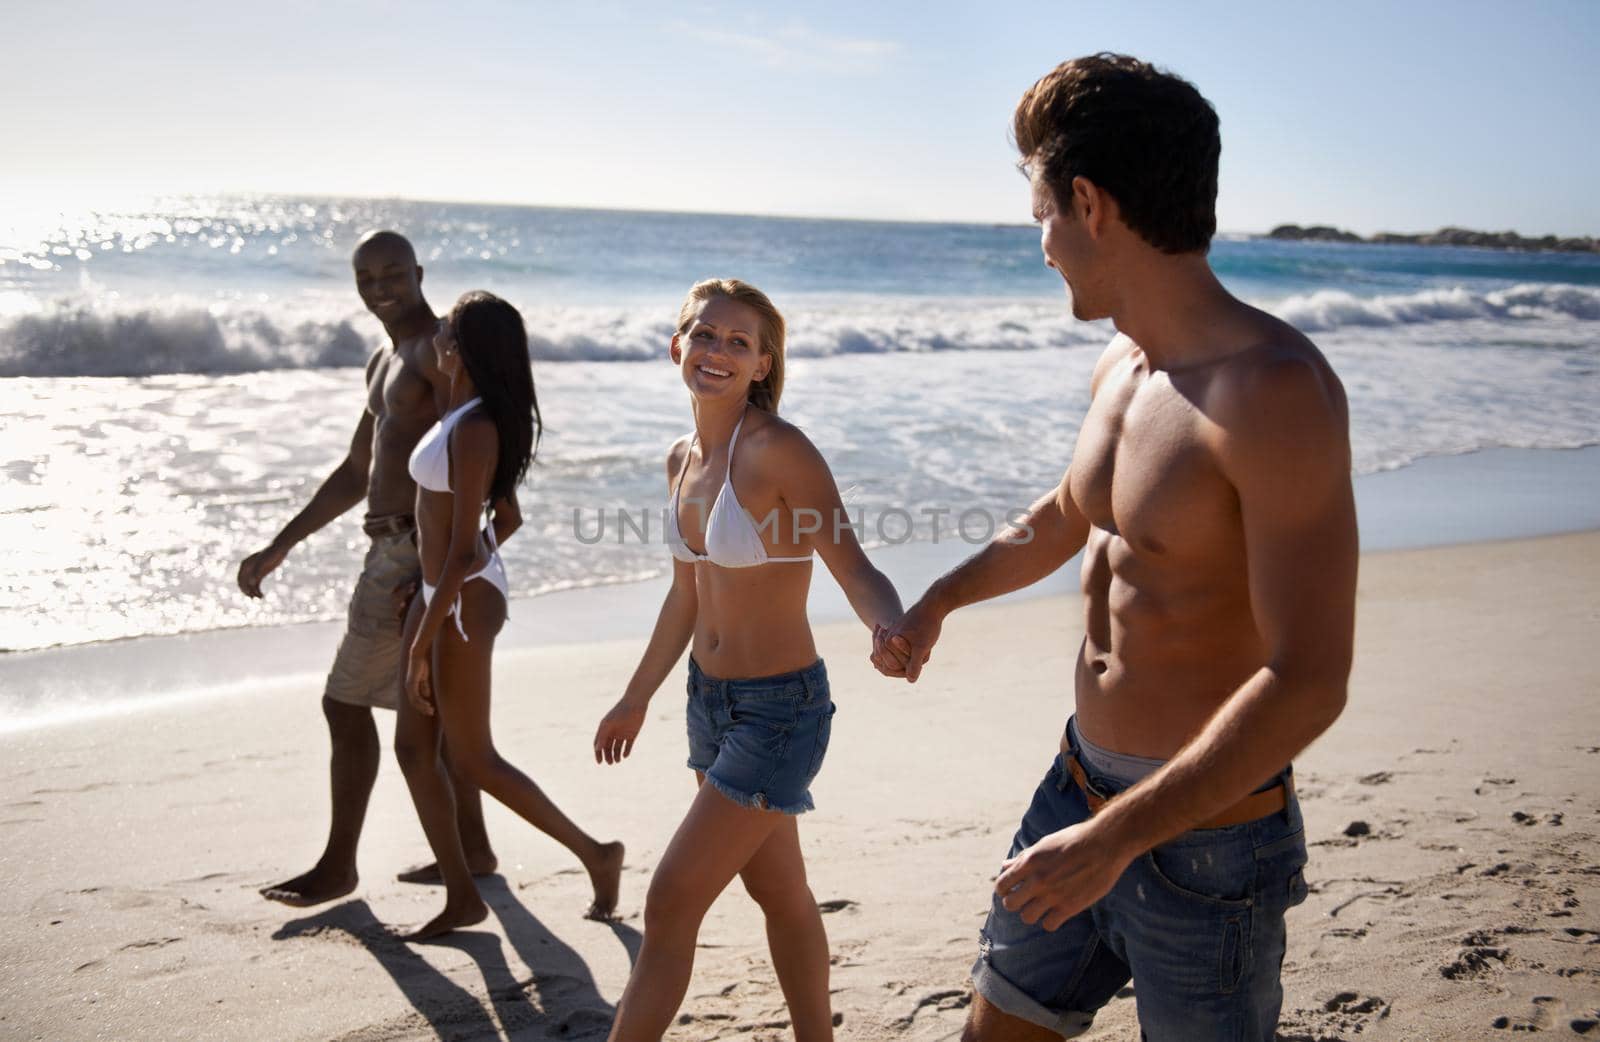 Two young couples taking a walk on the beach together.